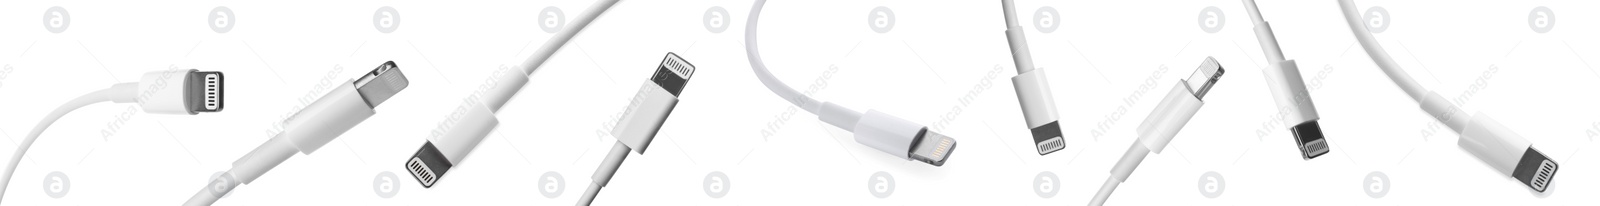 Image of Cable with lightning connector on white background, views from different sides